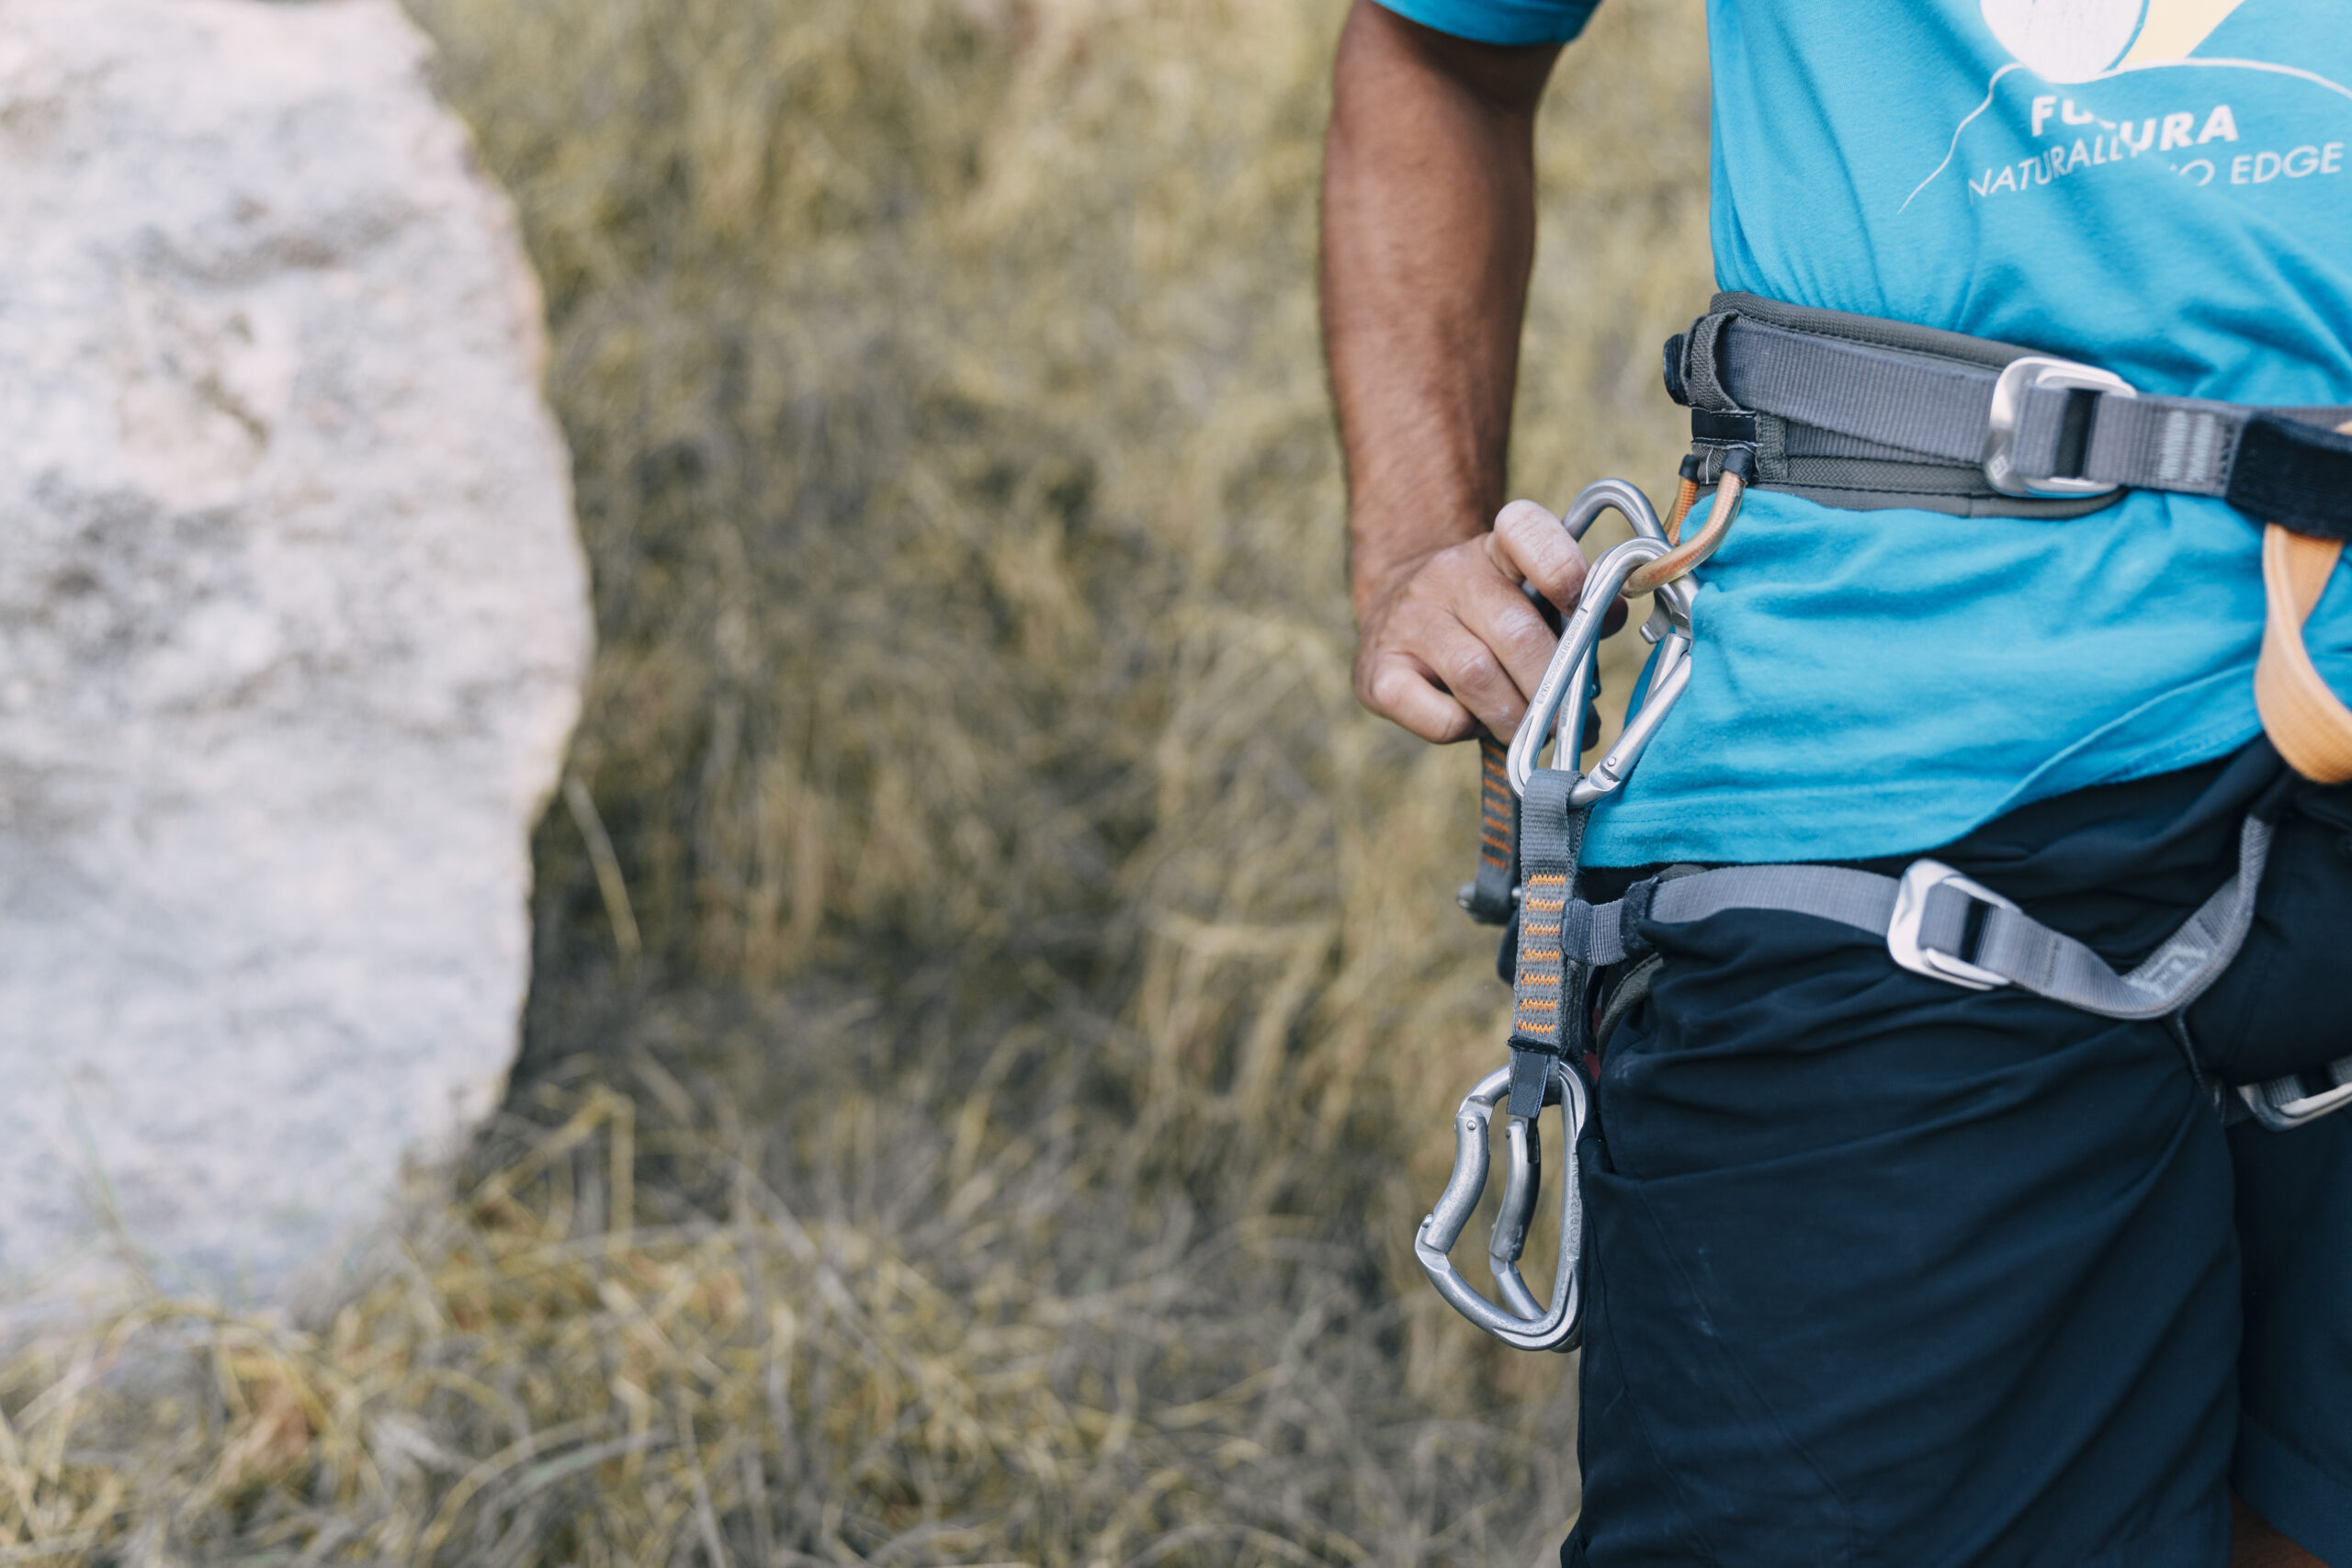 A close-up photo of a climber tying a rappel anchor using a sling and carabiner, showcasing the proper technique for creating a secure anchor point.